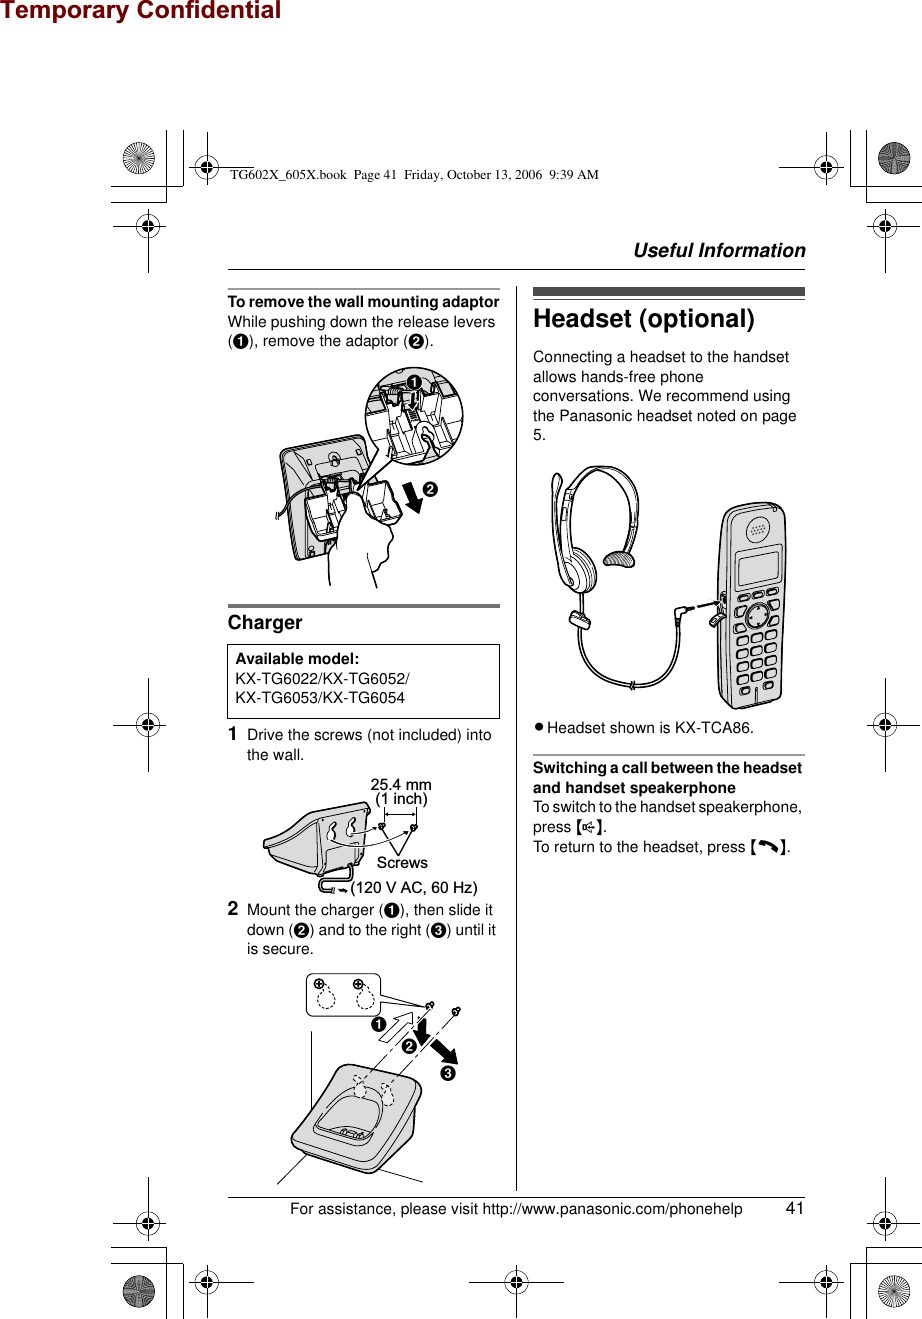 Useful InformationFor assistance, please visit http://www.panasonic.com/phonehelp 41To remove the wall mounting adaptorWhile pushing down the release levers (A), remove the adaptor (B).Charger1Drive the screws (not included) into the wall.2Mount the charger (A), then slide it down (B) and to the right (C) until it is secure.Headset (optional)Connecting a headset to the handset allows hands-free phone conversations. We recommend using the Panasonic headset noted on page 5.LHeadset shown is KX-TCA86.Switching a call between the headset and handset speakerphoneTo switch to the handset speakerphone, press {s}.To return to the headset, press {C}.Available model:KX-TG6022/KX-TG6052/KX-TG6053/KX-TG6054AB25.4 mm(1 inch)Screws(120 V AC, 60 Hz)ABCTG602X_605X.book  Page 41  Friday, October 13, 2006  9:39 AMTemporary Confidential